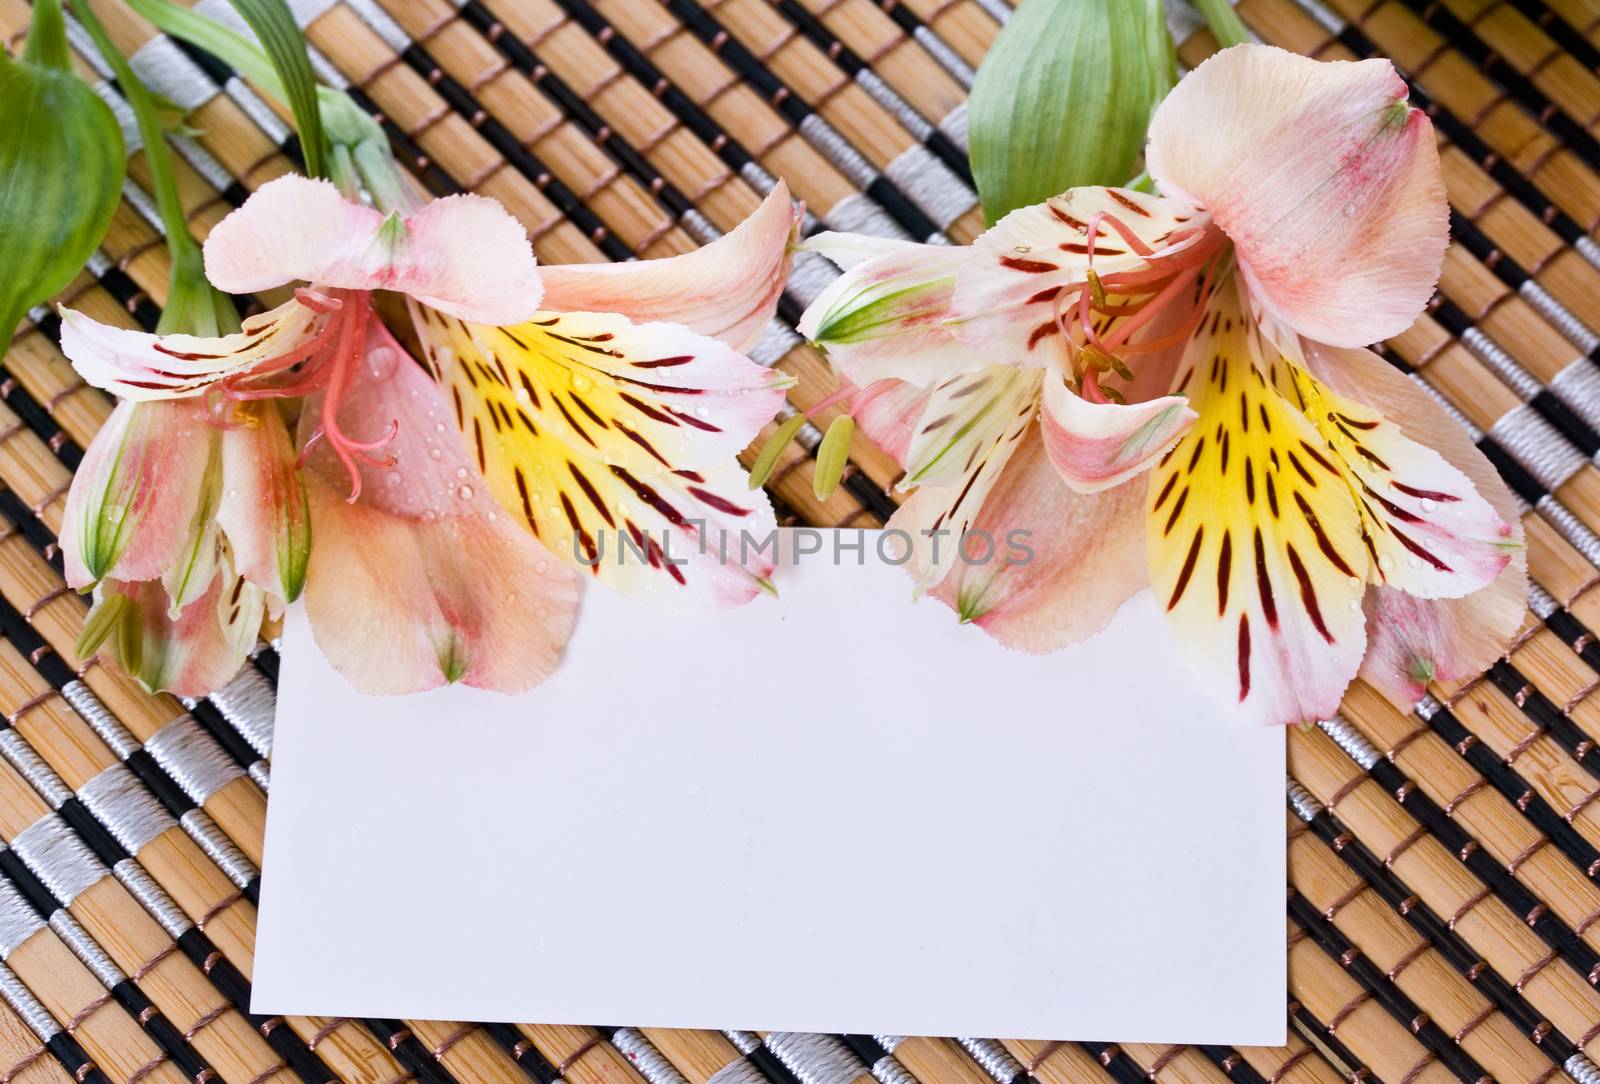 Alstroemeria flowers with a white card by Irina1977